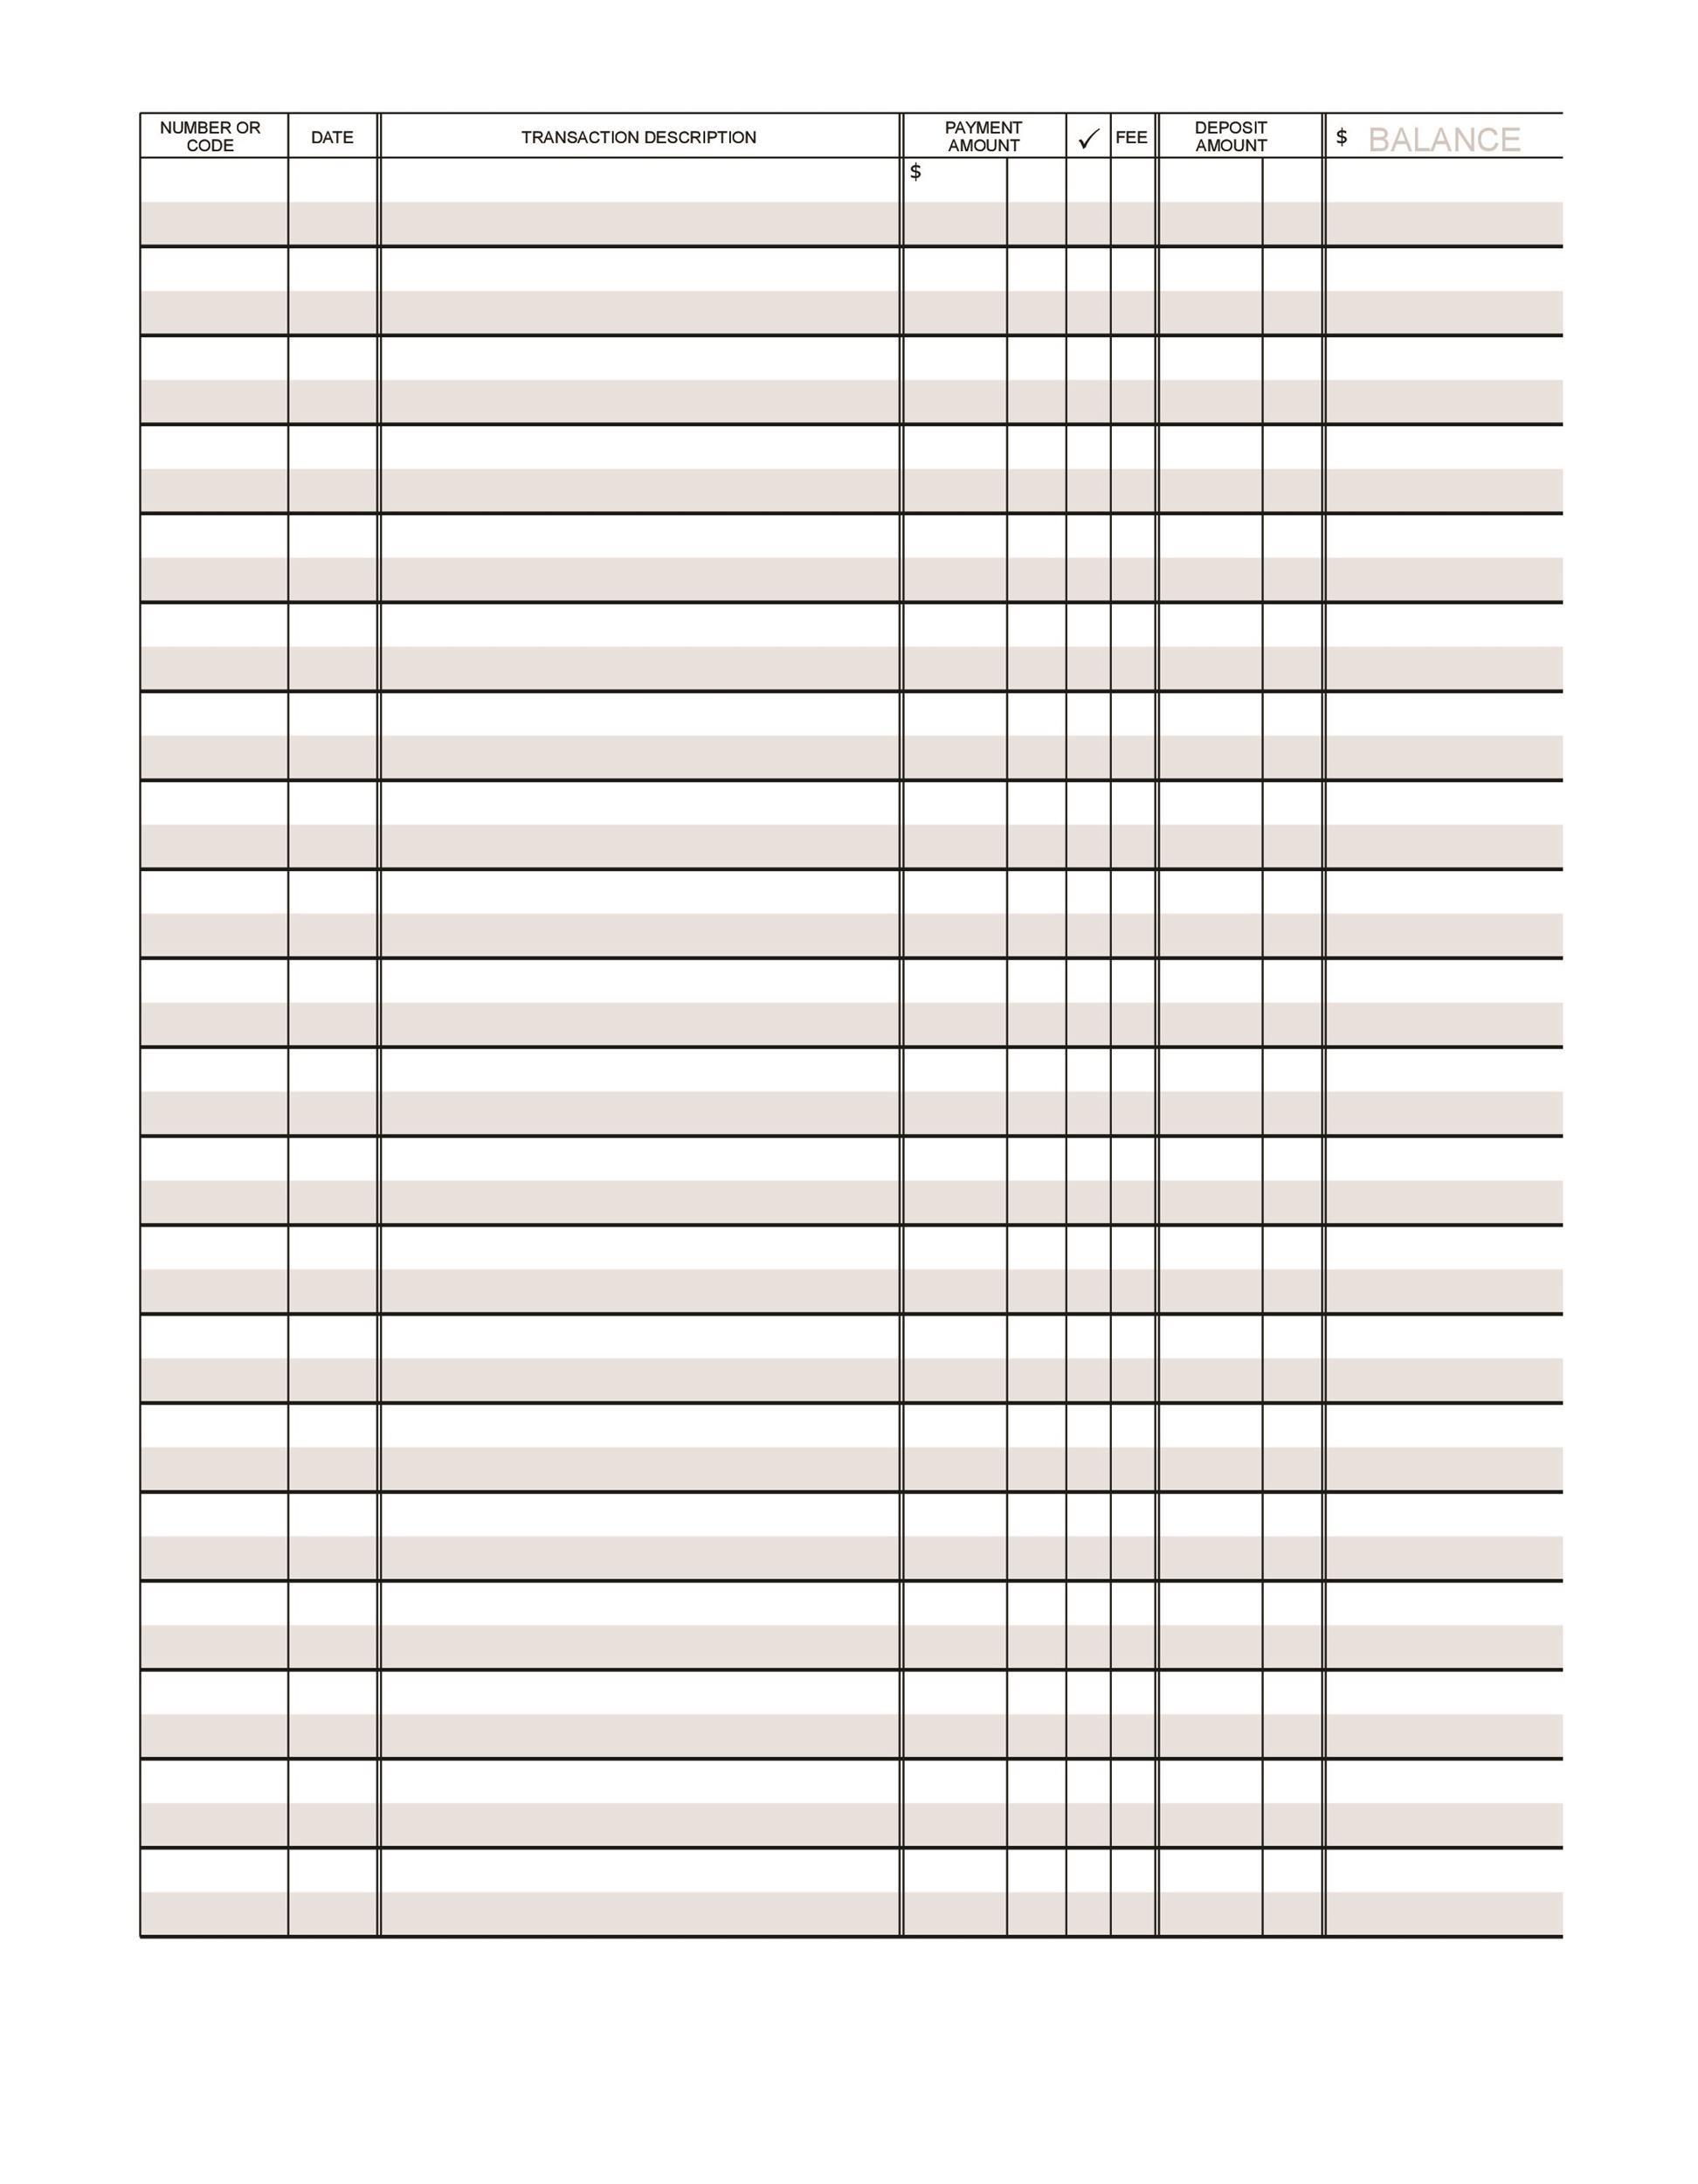 Free Printable Check Register - FREE DOWNLOAD - Aashe